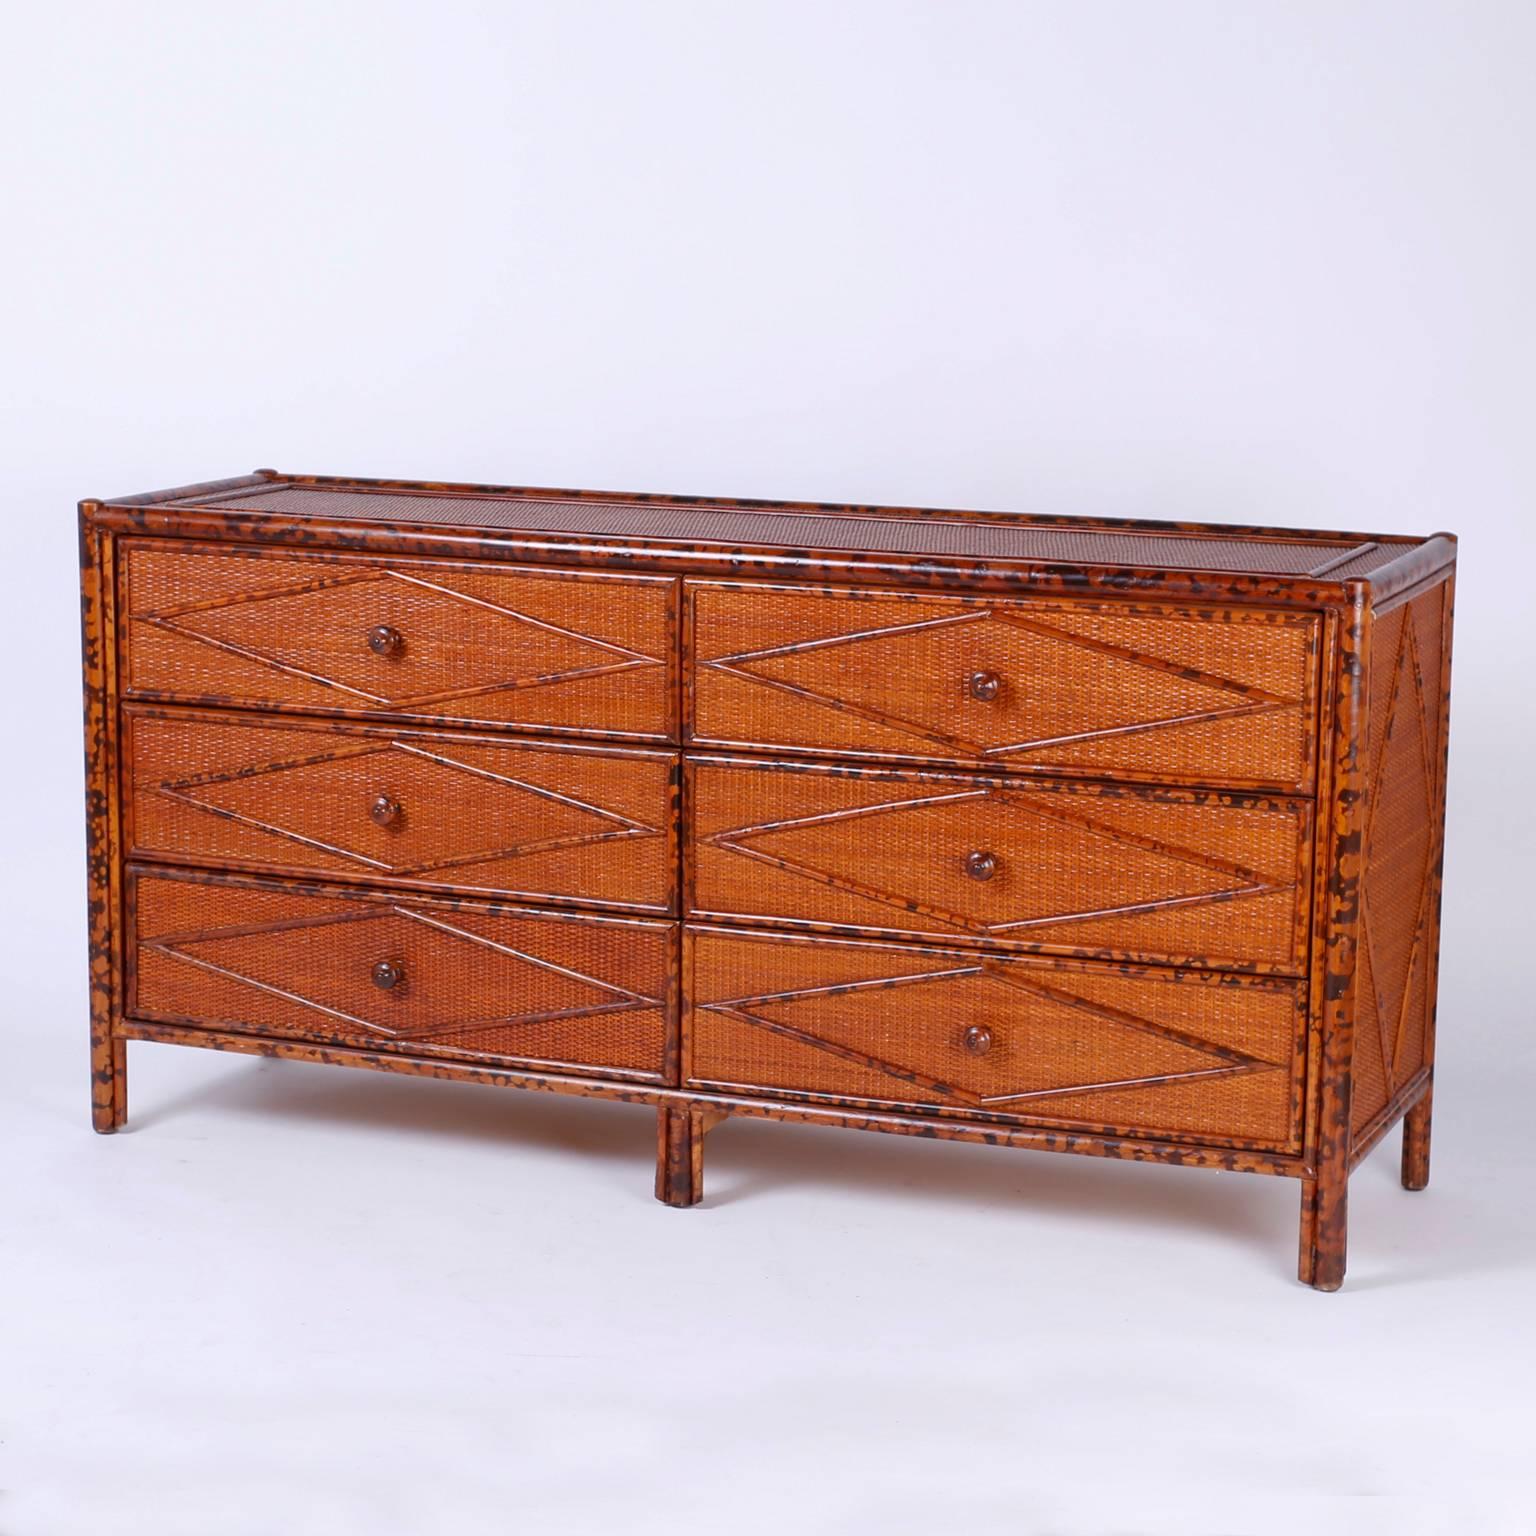 Midcentury British Colonial style burnt bamboo and grass cloth double dresser or chest of drawers with six drawers. The top, sides, and drawer fronts are grass cloth bordered and geometrically decorated with faux burnt bamboo. Sold exclusively at